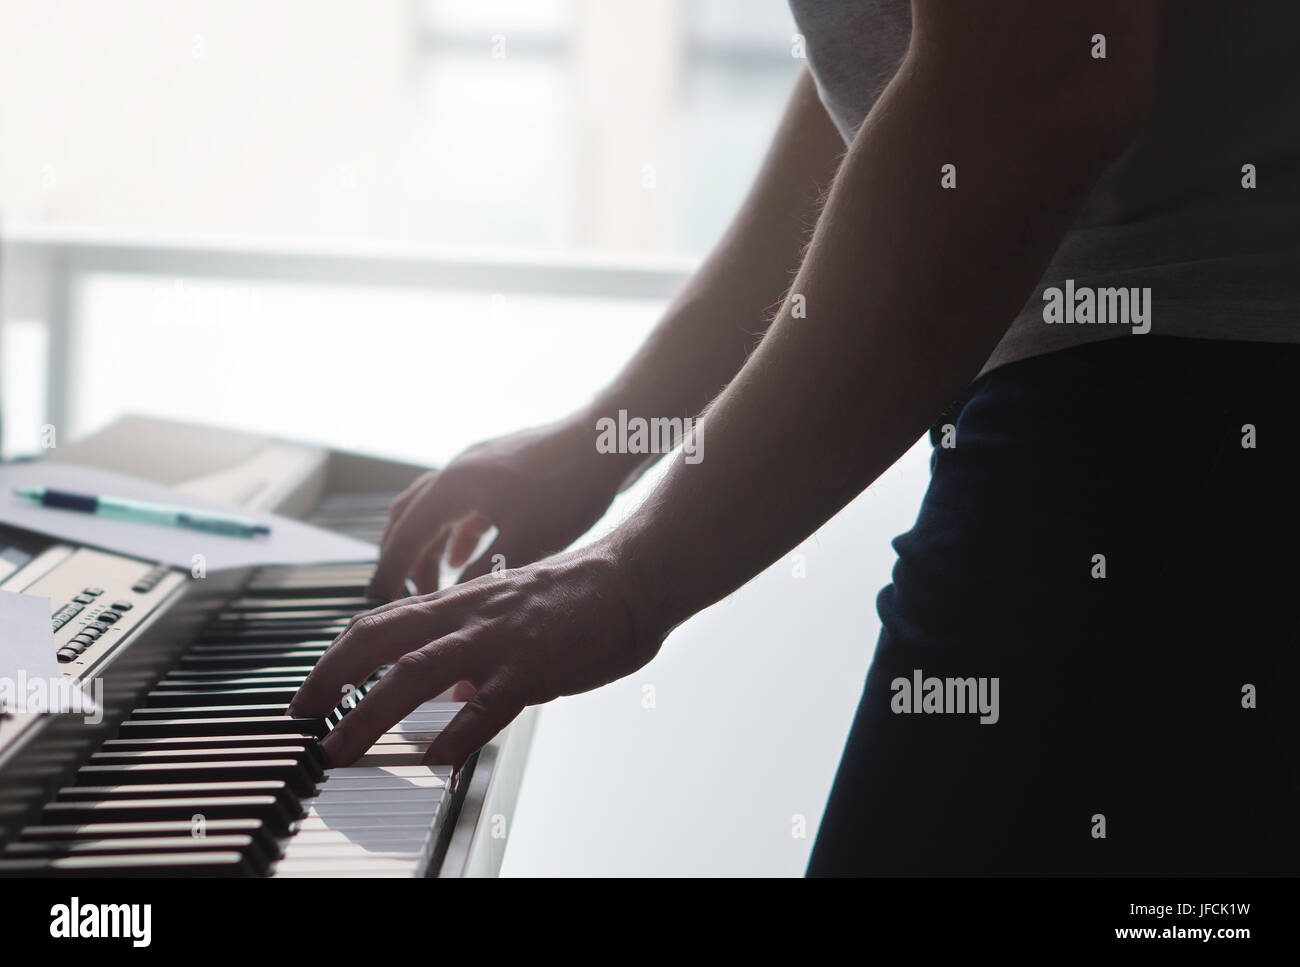 Man play piano standing. Talented musician and pianist practice and train skills by the window. Note paper and pen on the instrument. Stock Photo